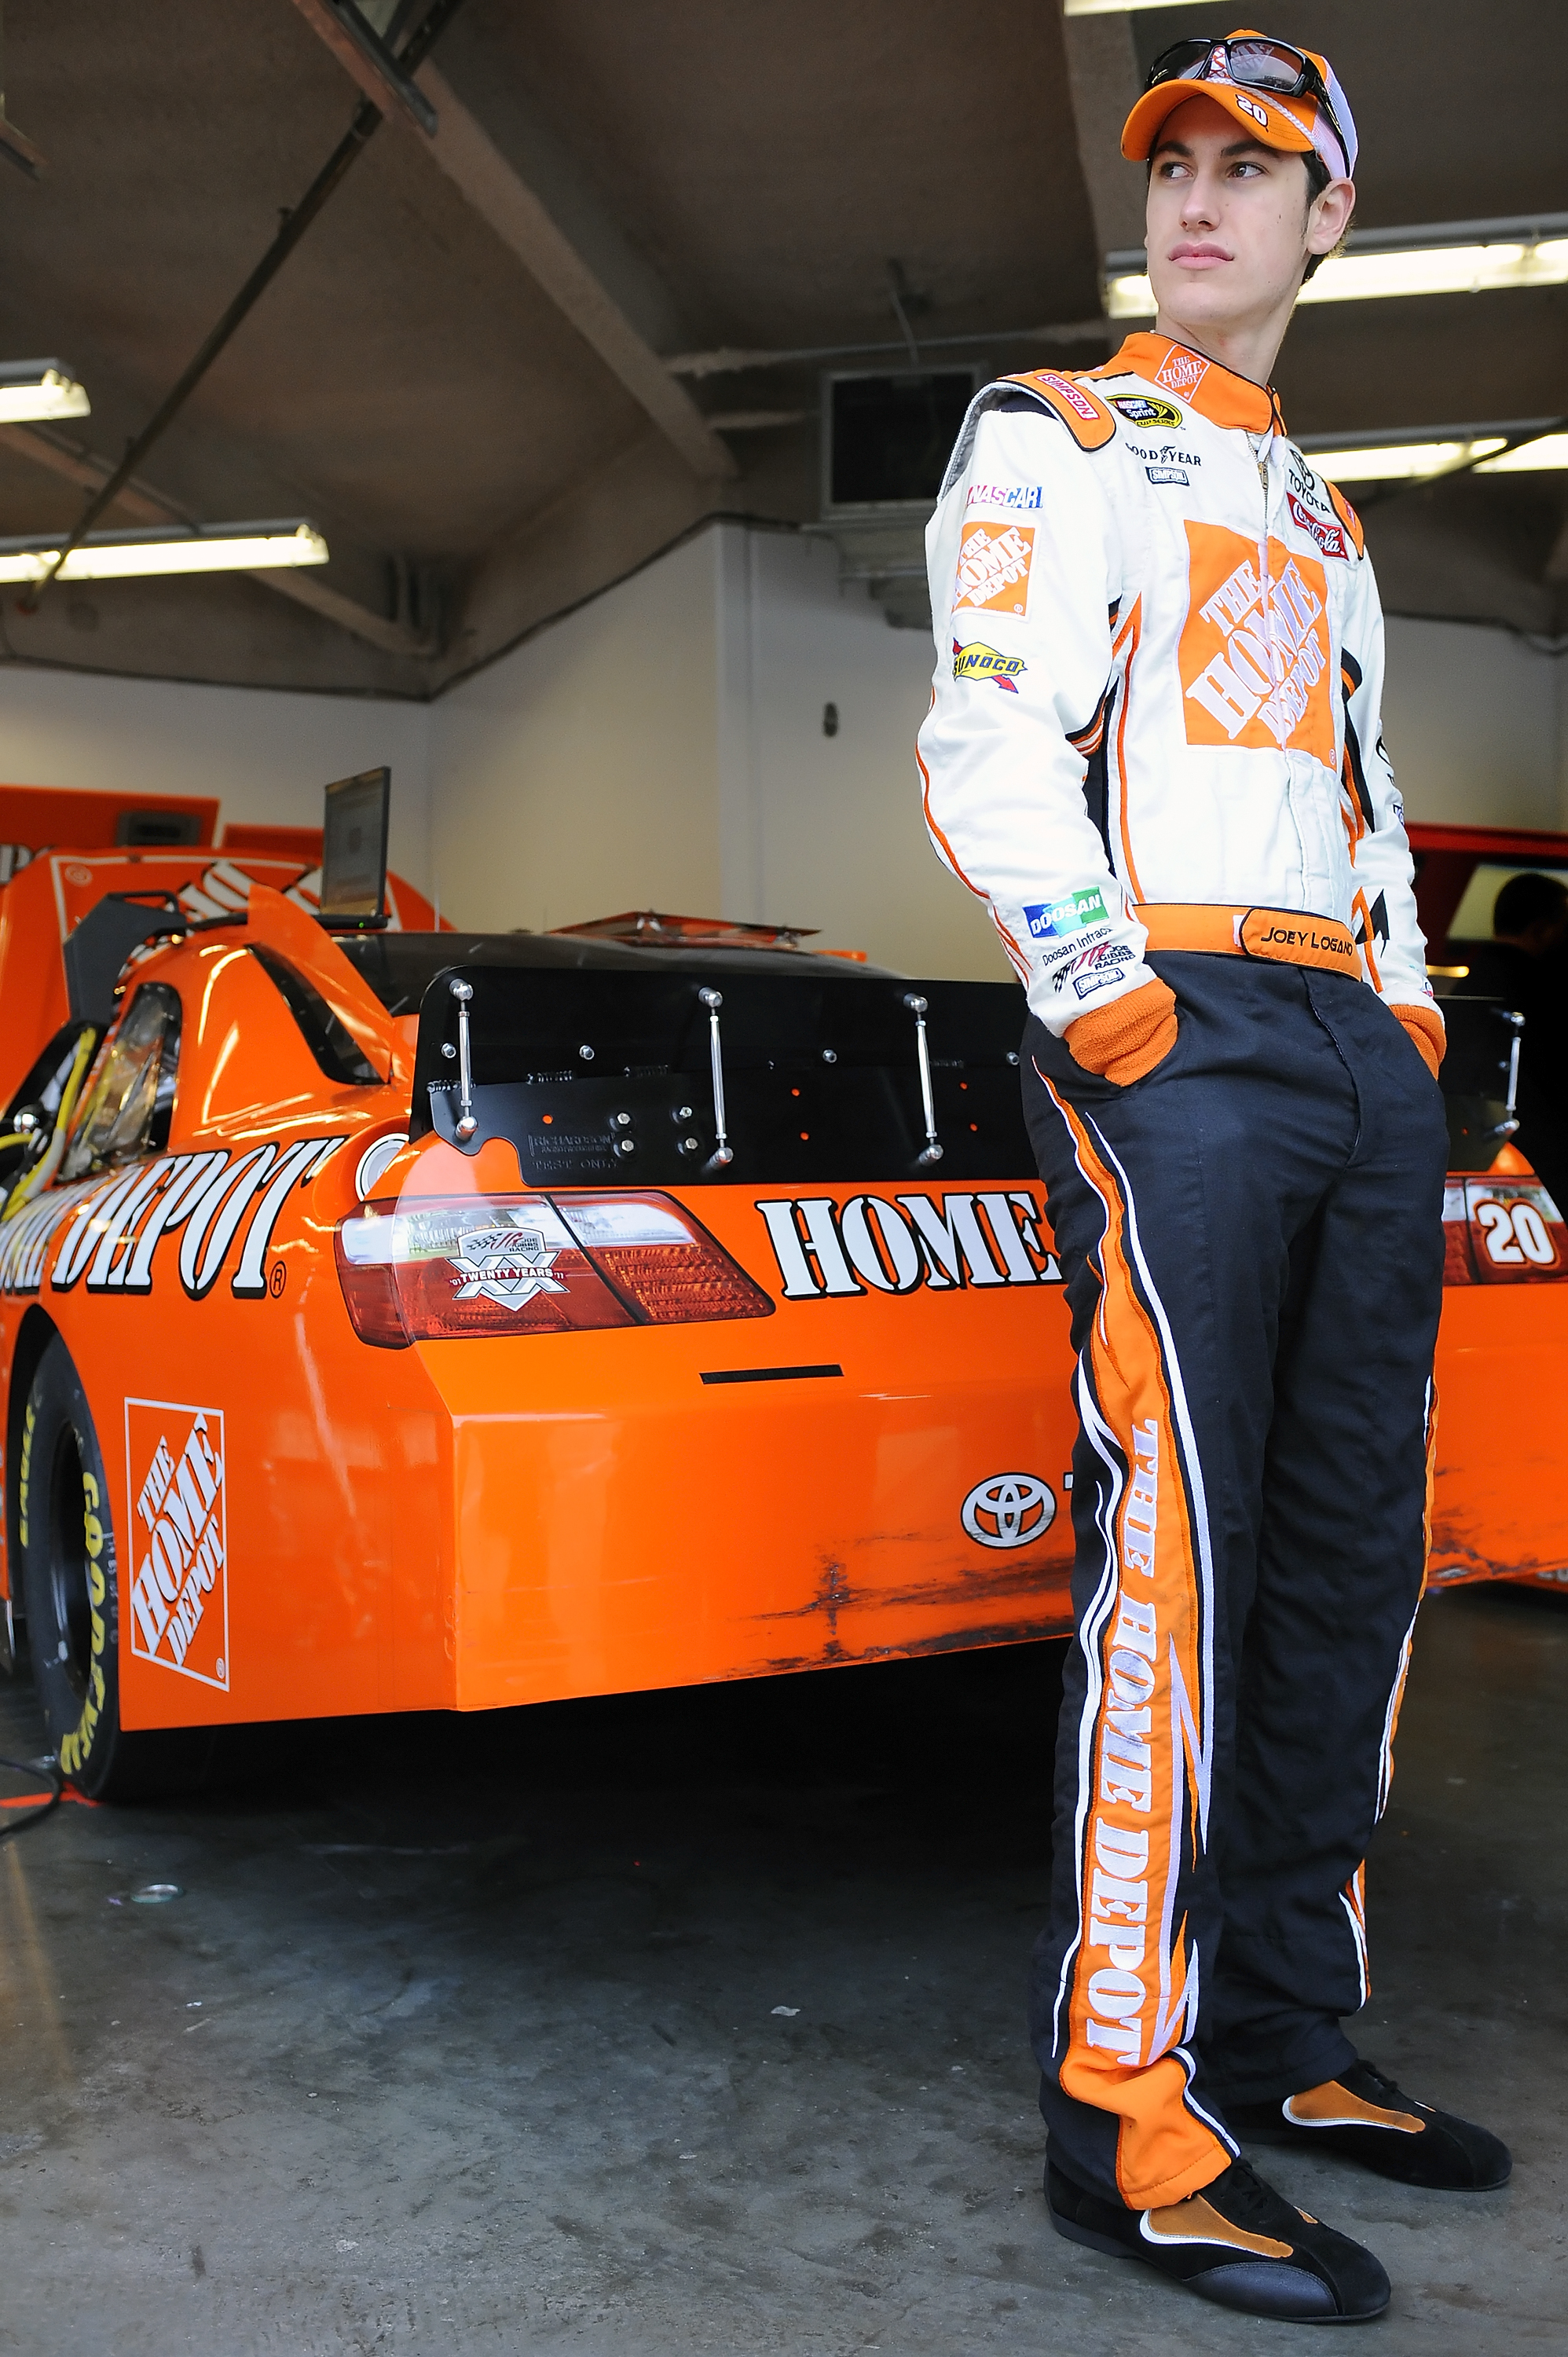 DAYTONA BEACH, FL - JANUARY 22:  Joey Logano, driver of the #20 Home Depot Toyota, stands by his car in the garage area during testing at Daytona International Speedway on January 22, 2011 in Daytona Beach, Florida.  (Photo by Jared C. Tilton/Getty Images